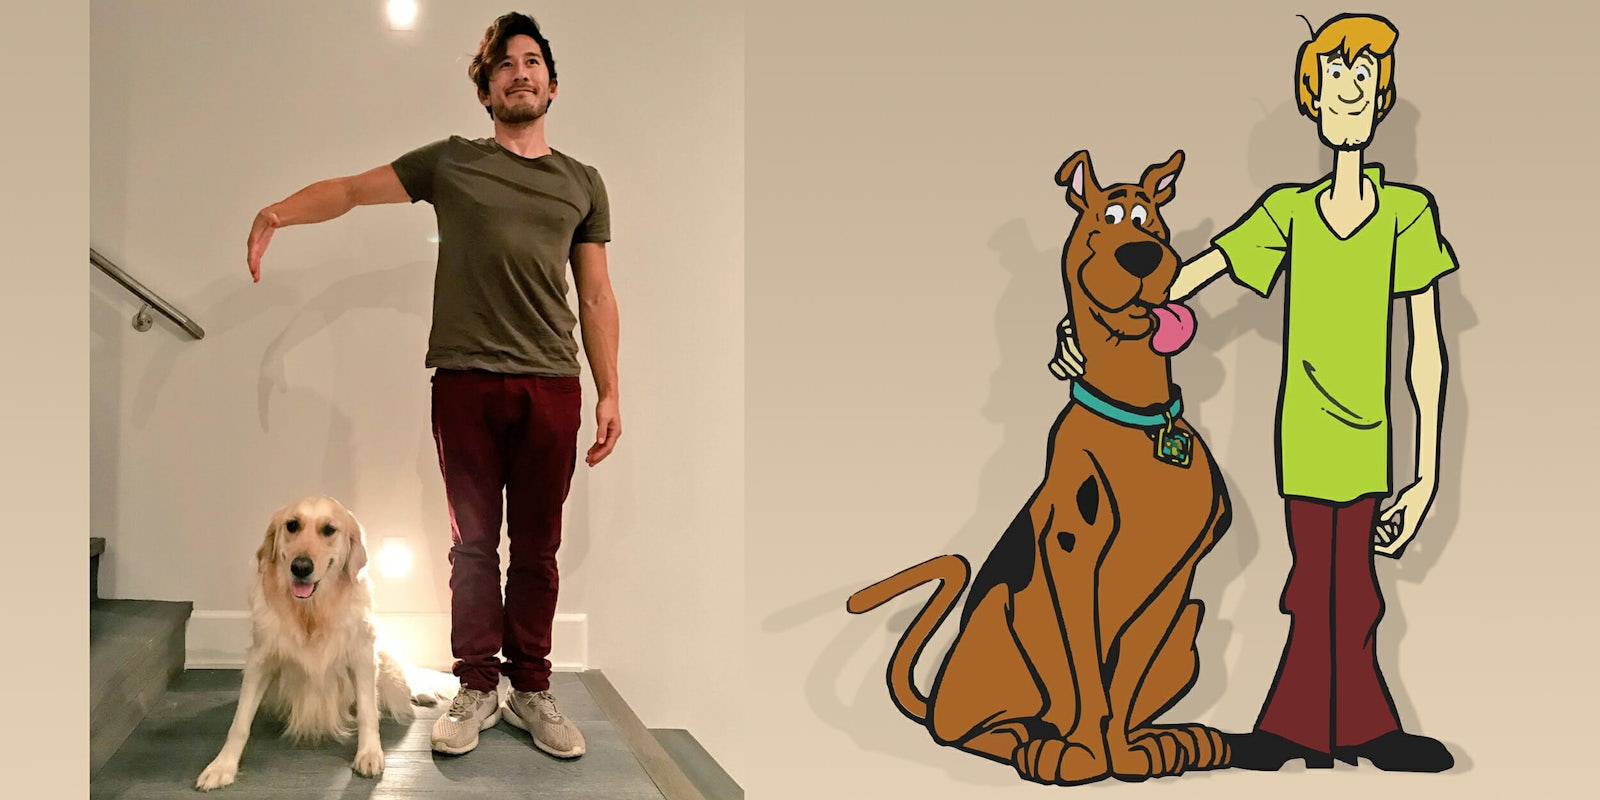 Man posing with his dog, wants to look like Shaggy and Scooby-Doo